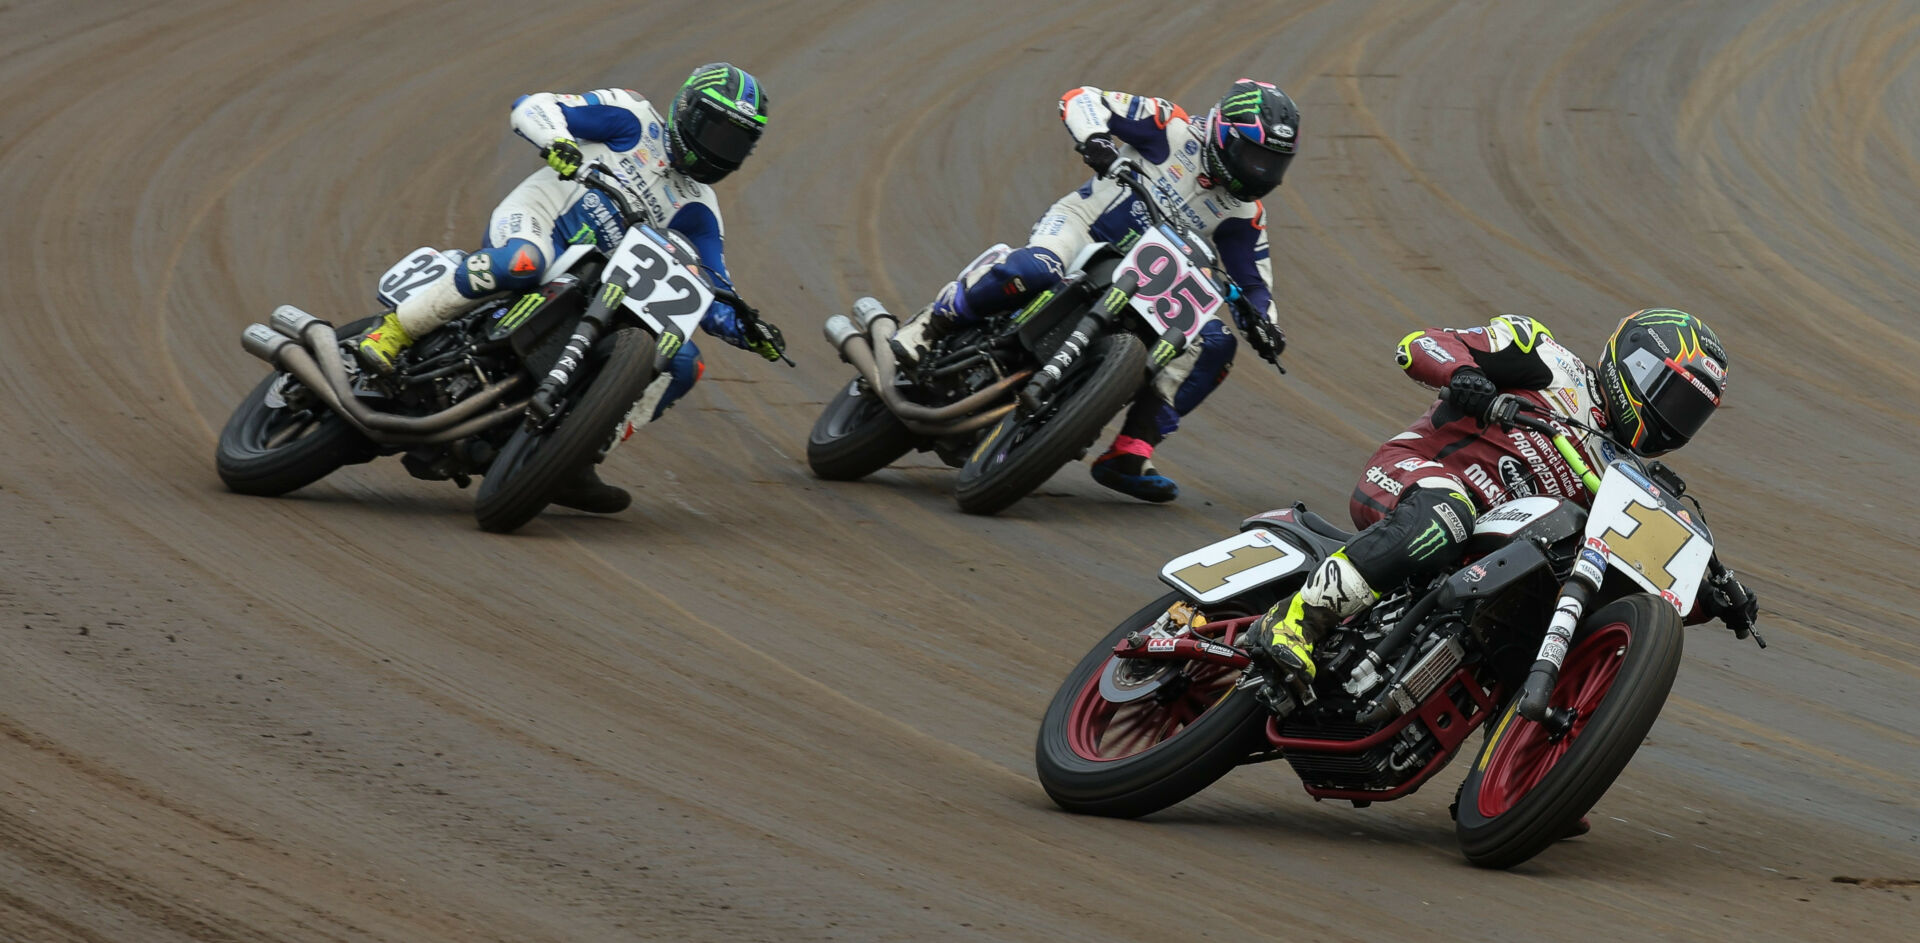 Jared Mees (1), Dallas Daniels (32), and JD Beach (95) as seen at Springfield Mile I. Photo by Brian J. Nelson, courtesy AFT.